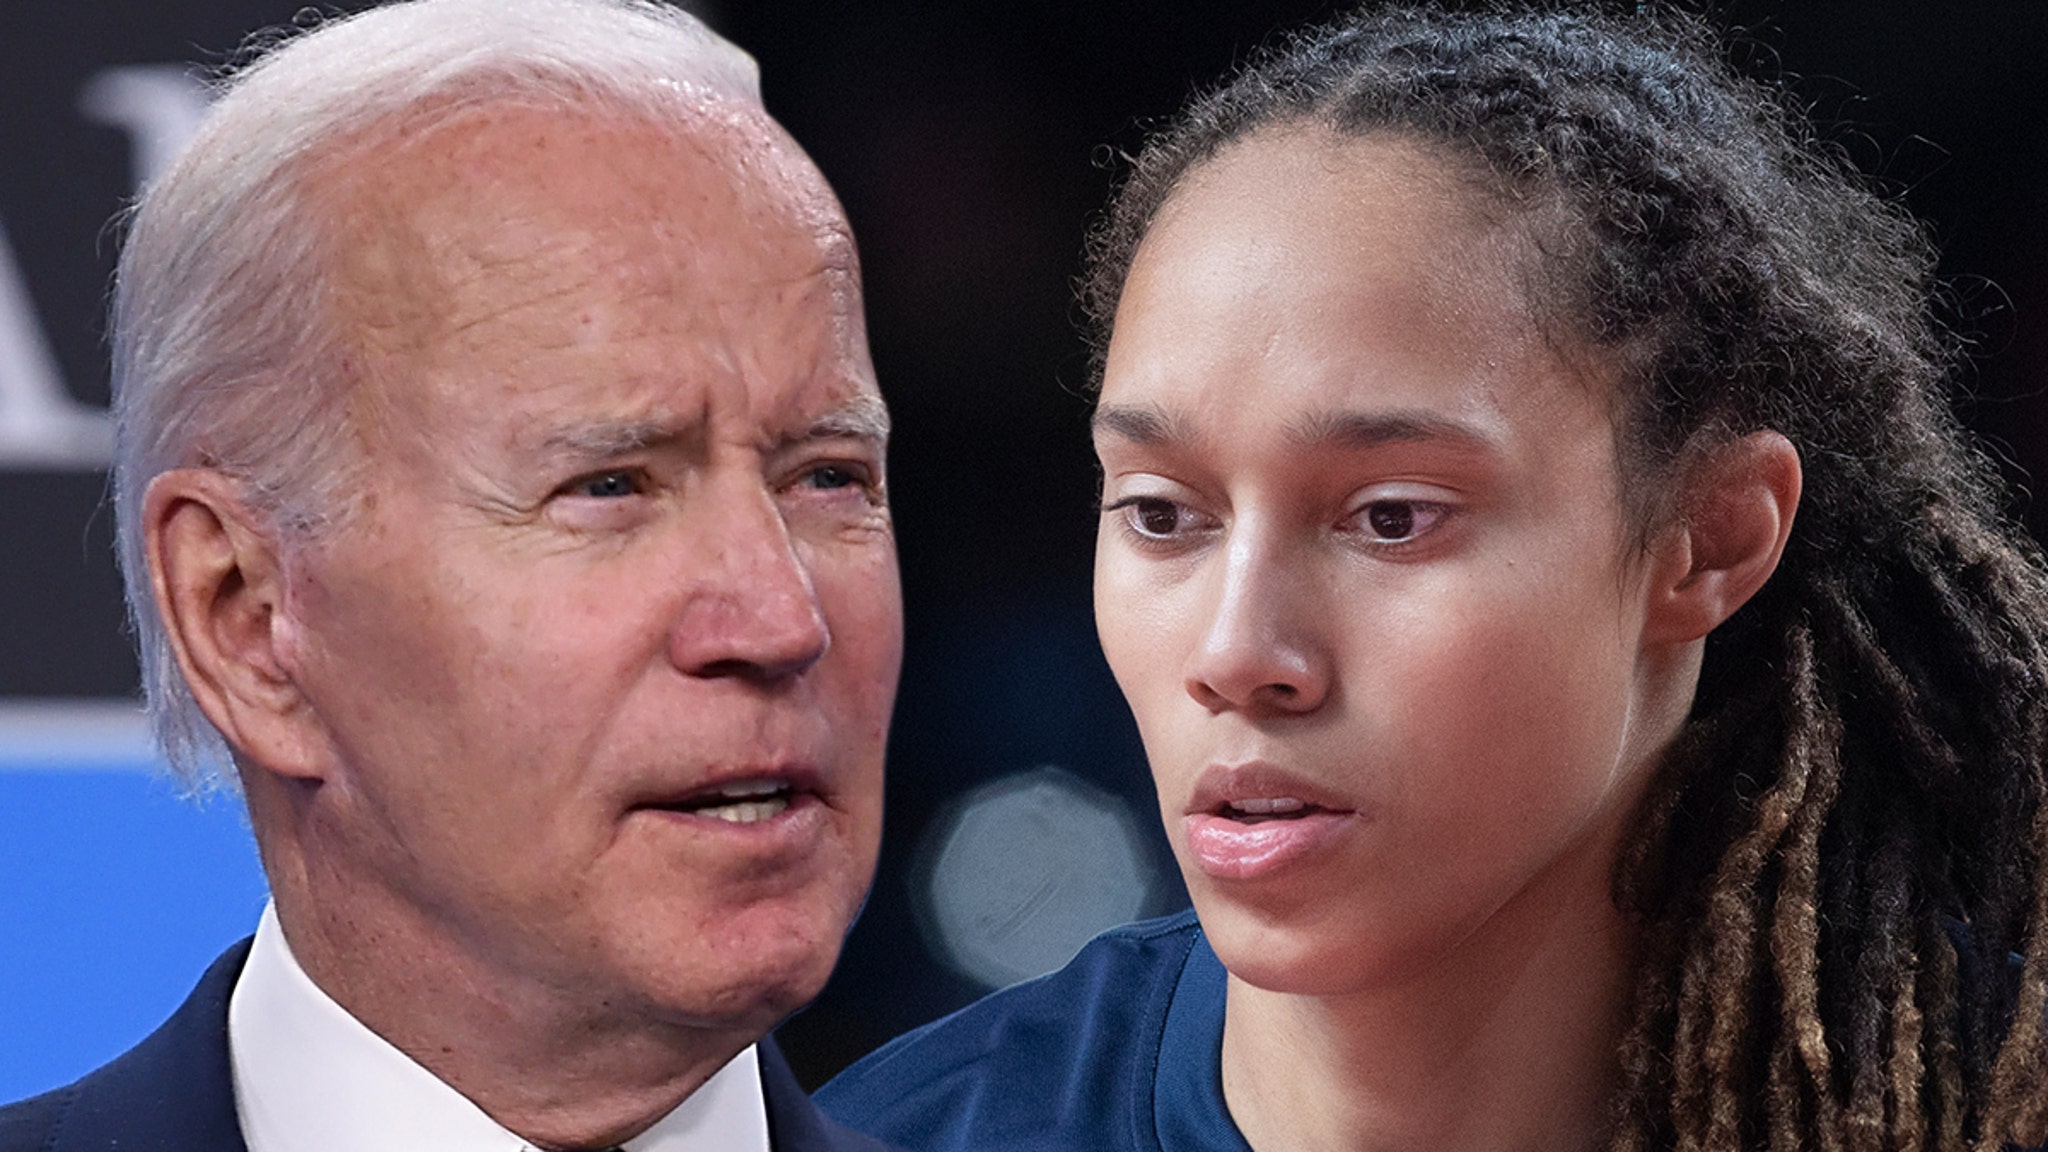 Joe Biden calls out Brittney Griner's wife, says US is 'working to secure' WNBA star's release